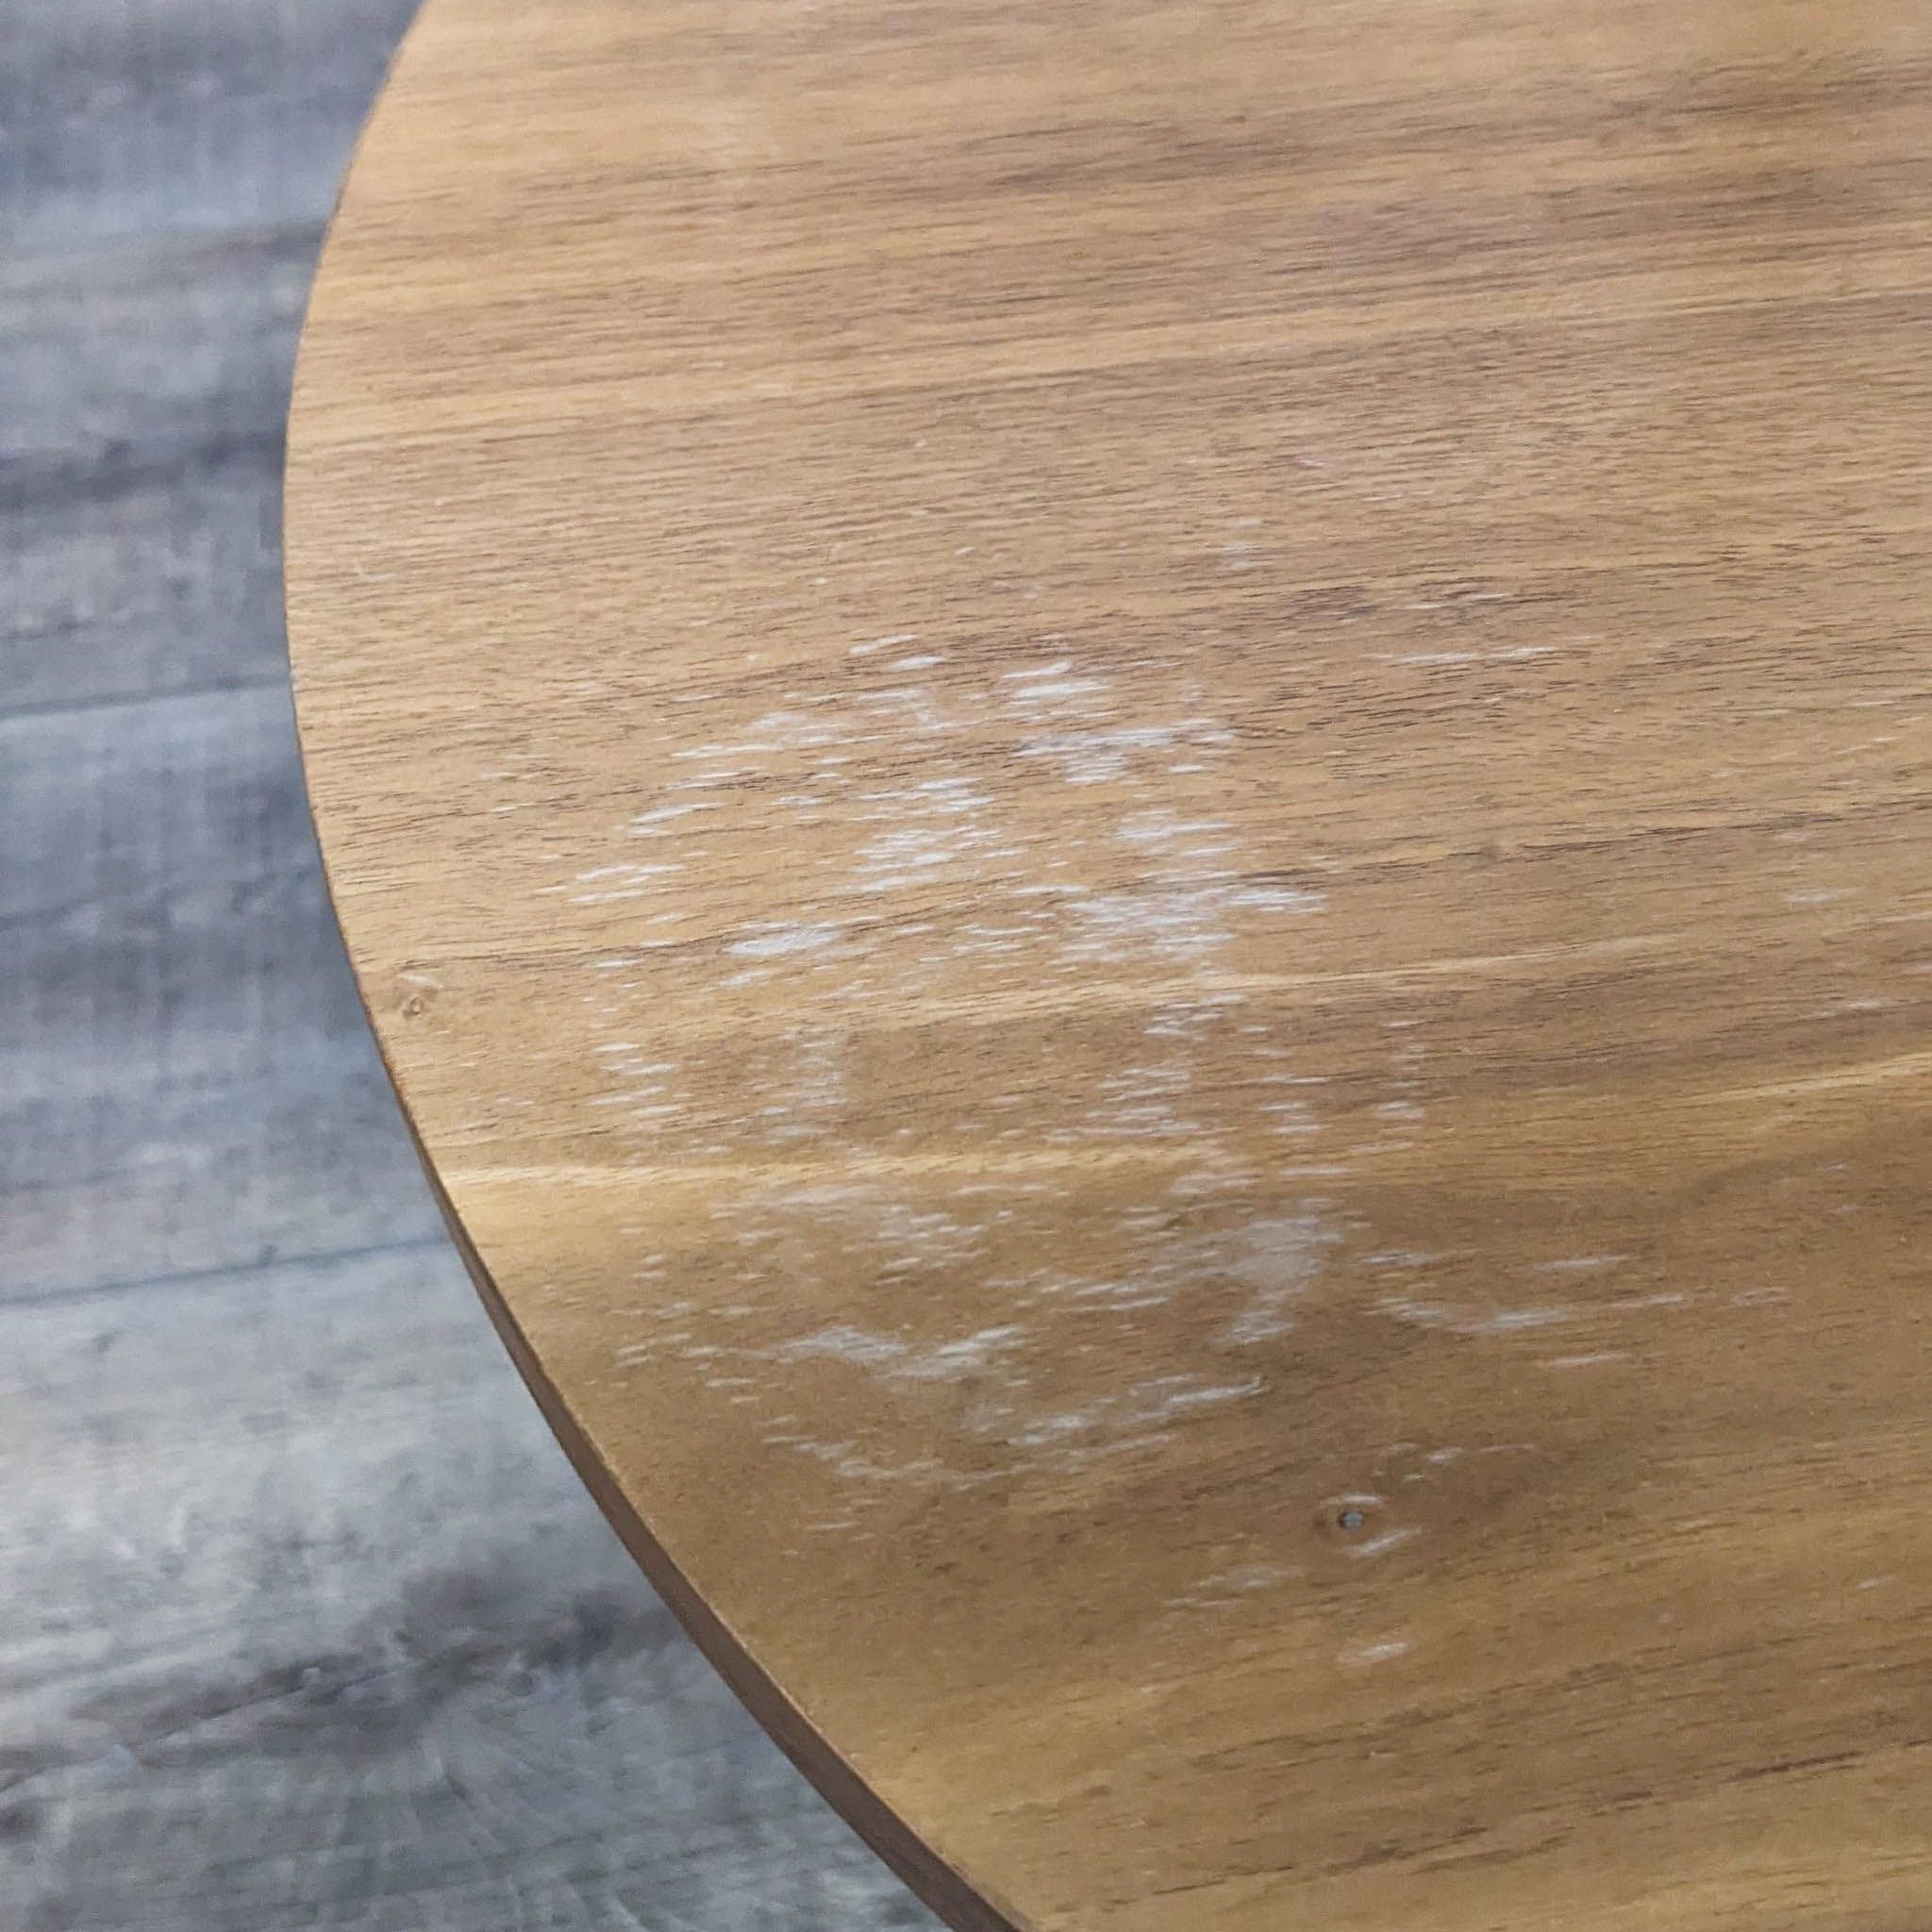 Close-up of a circular wooden shelf with a visible water stain on its surface.